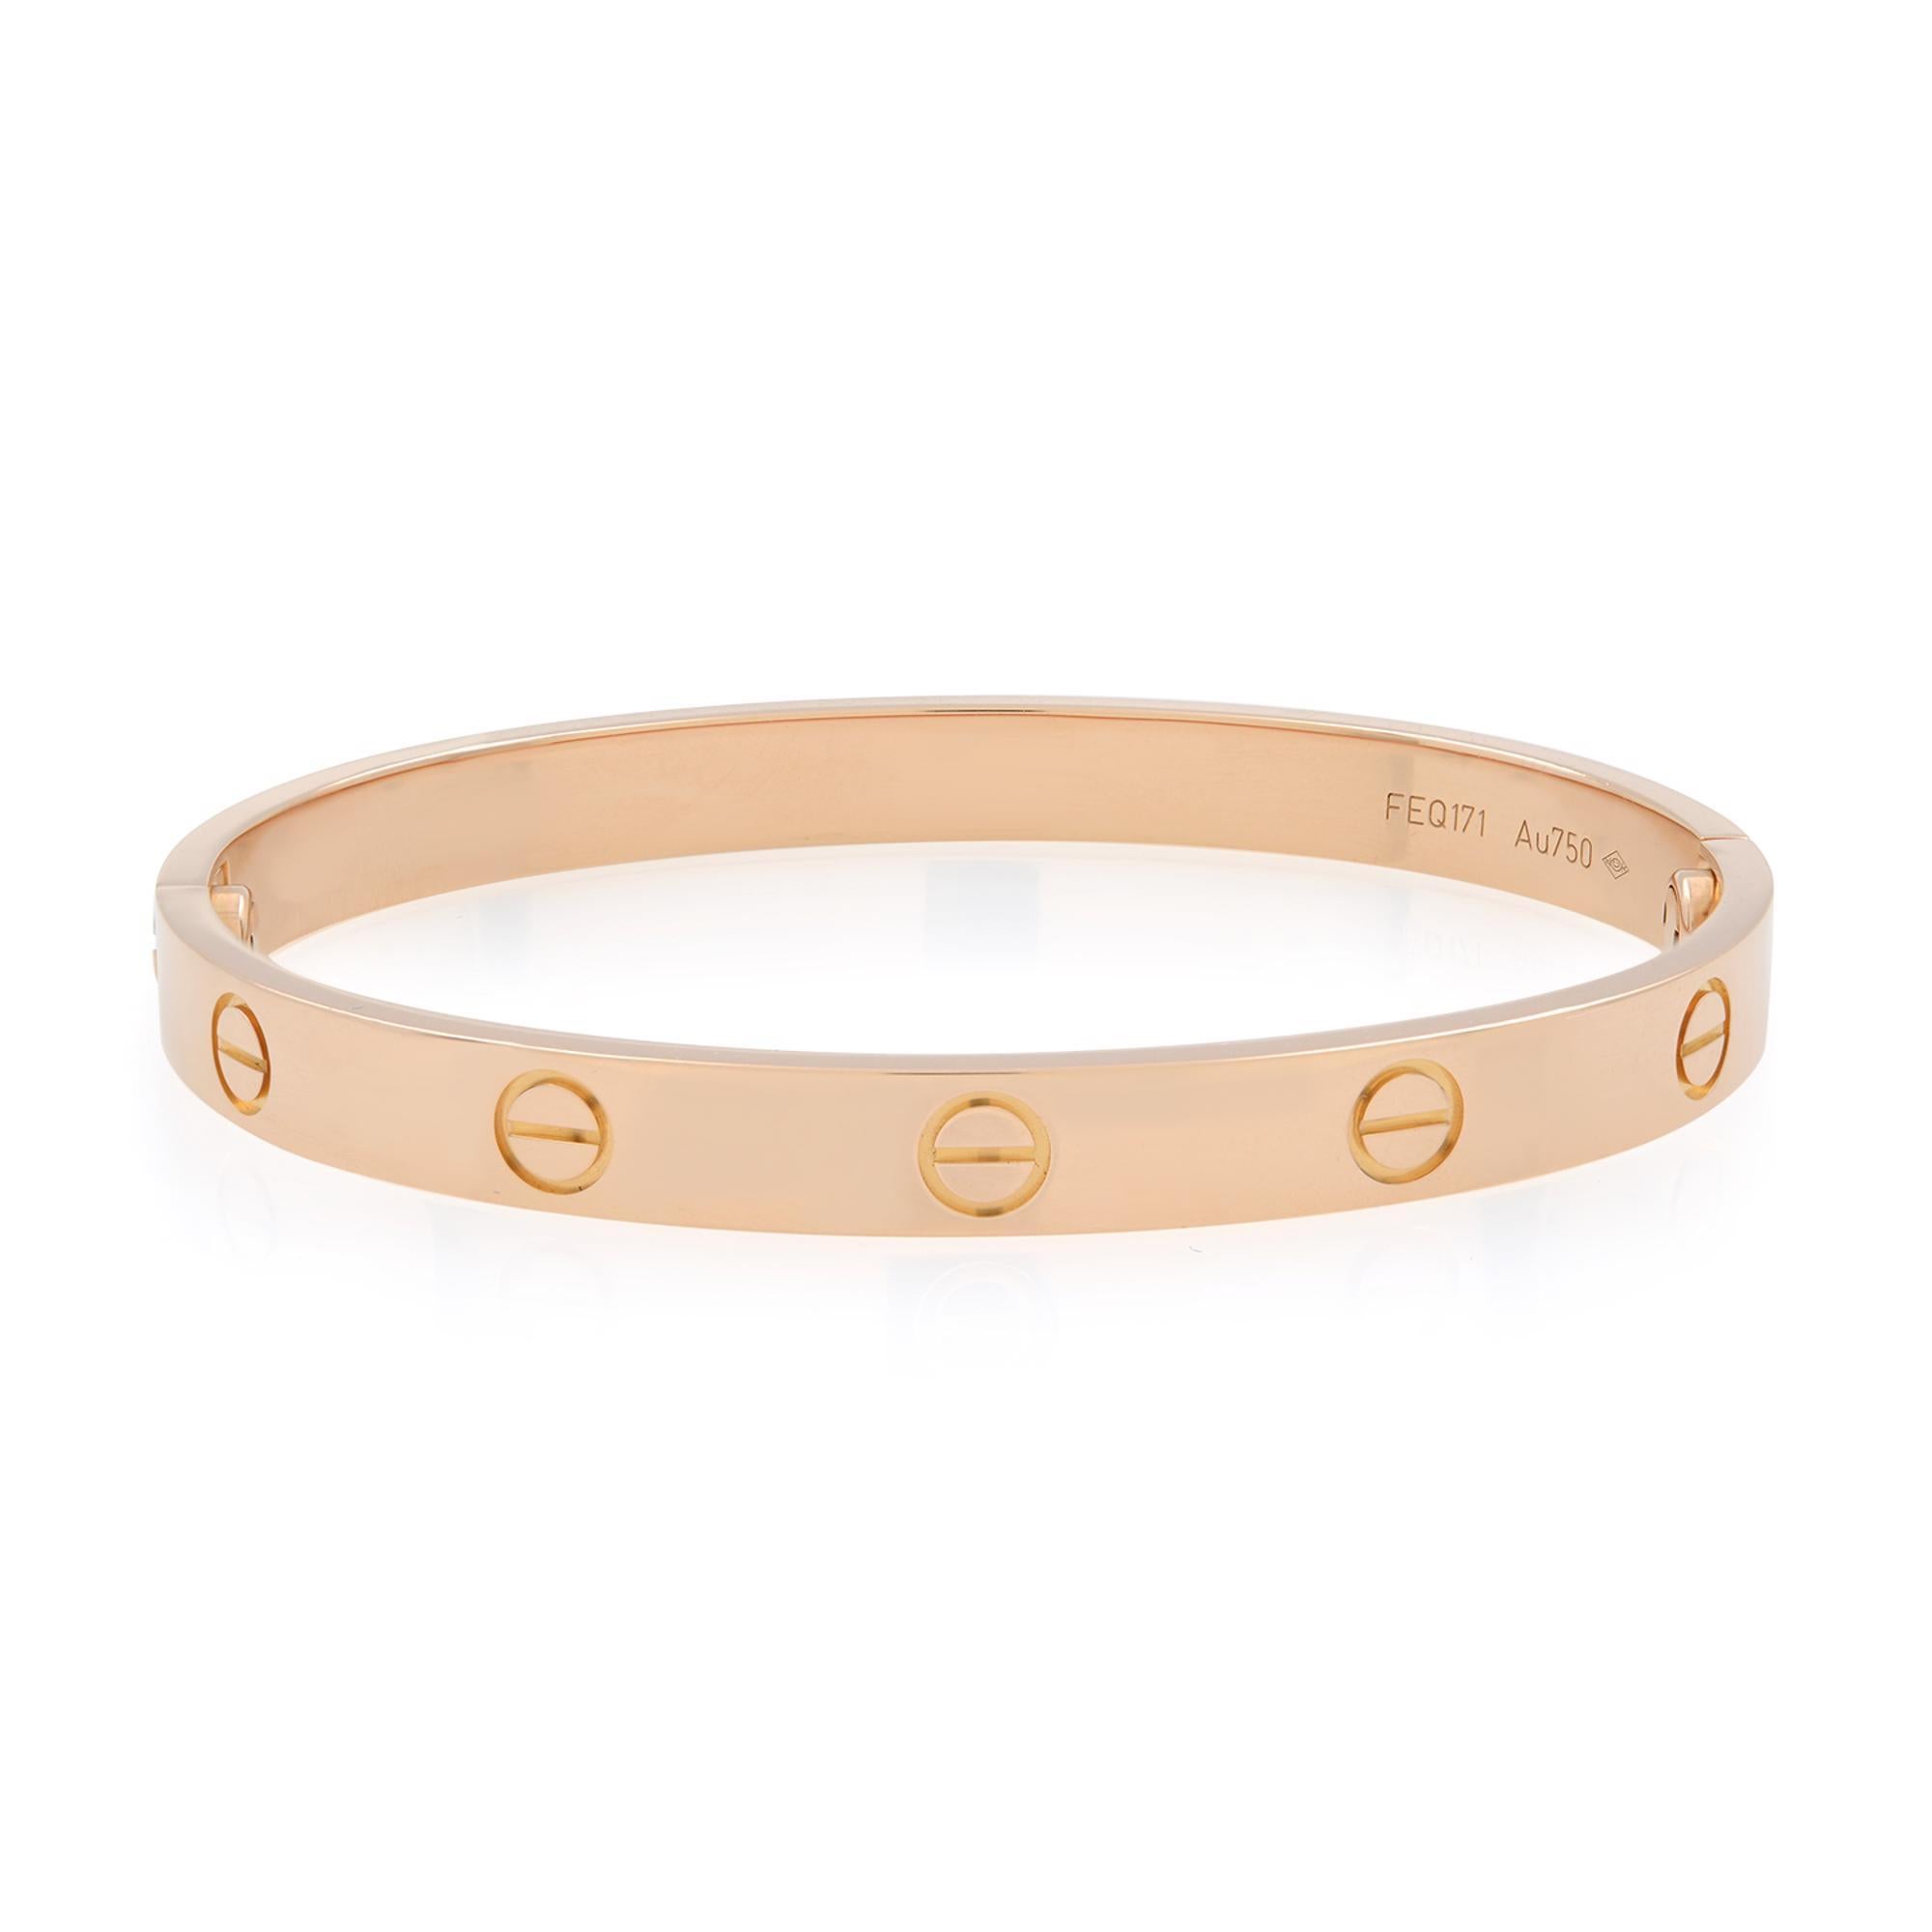 Cartier classic Love bracelet bangle size 17. Crafted in 18k rose gold. Width: 6.1mm. New style screw system. Excellent pre-owned condition. Comes with a screw driver. No original box and paper included. Chronostore appraisal included. 